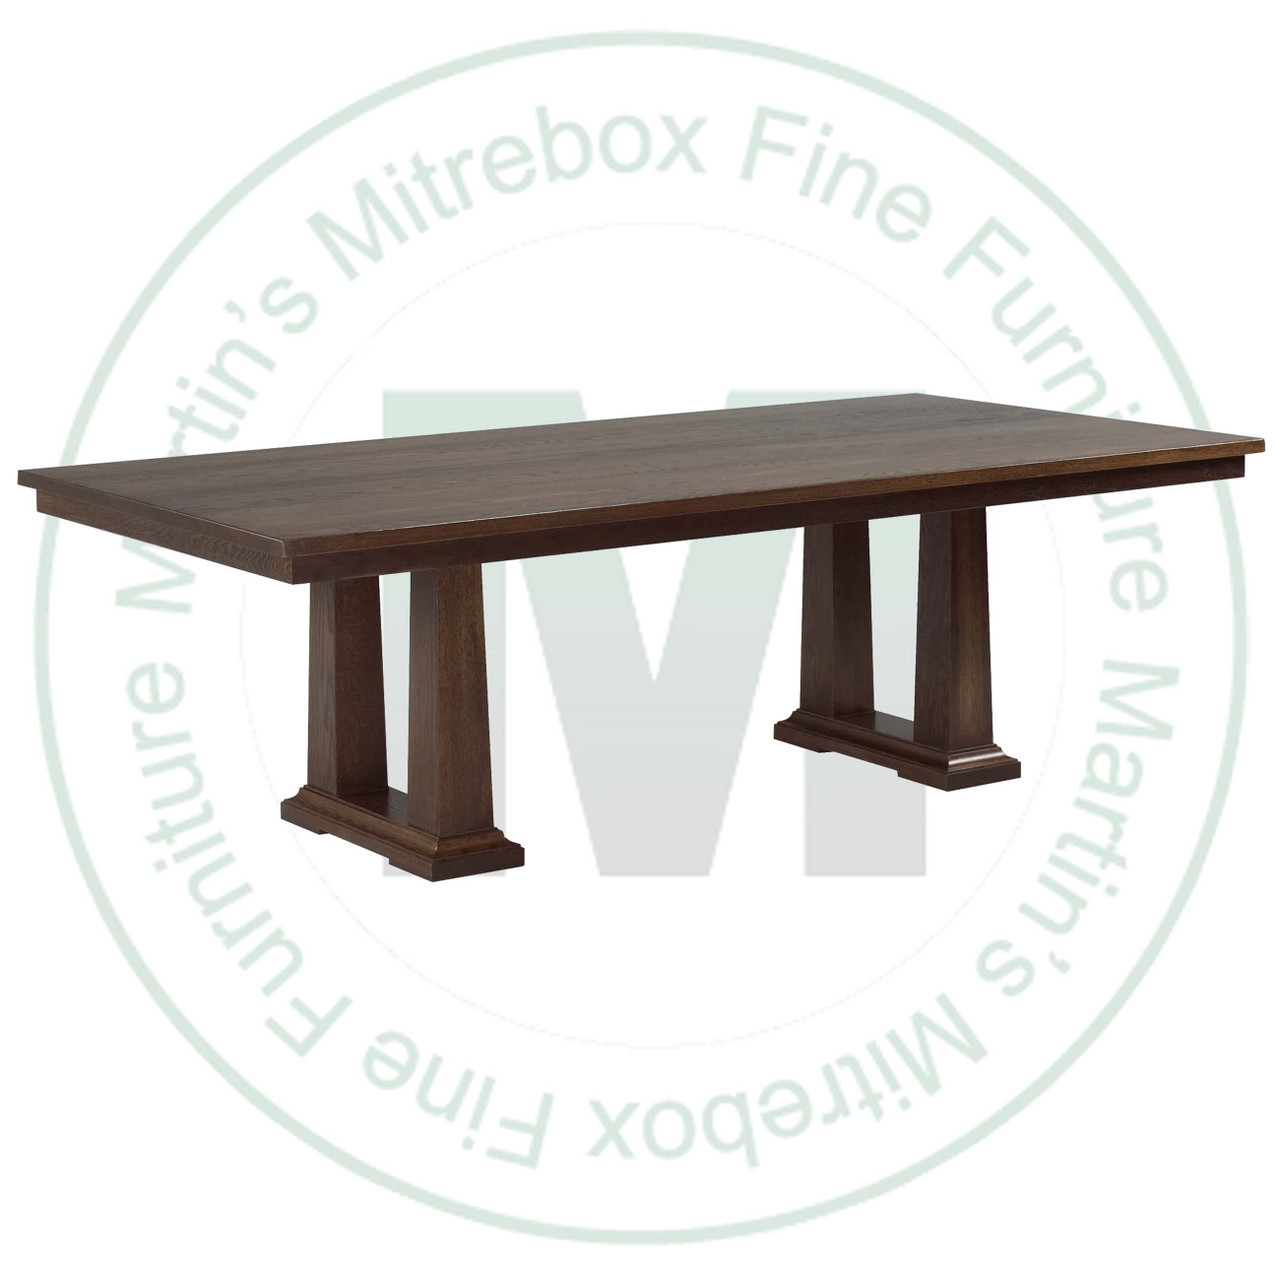 Maple Acropolis Solid Top Double Pedestal Table 48''D x 84''W x 30''H Table Has 1.25'' Thick Top With 16'' Extensions.